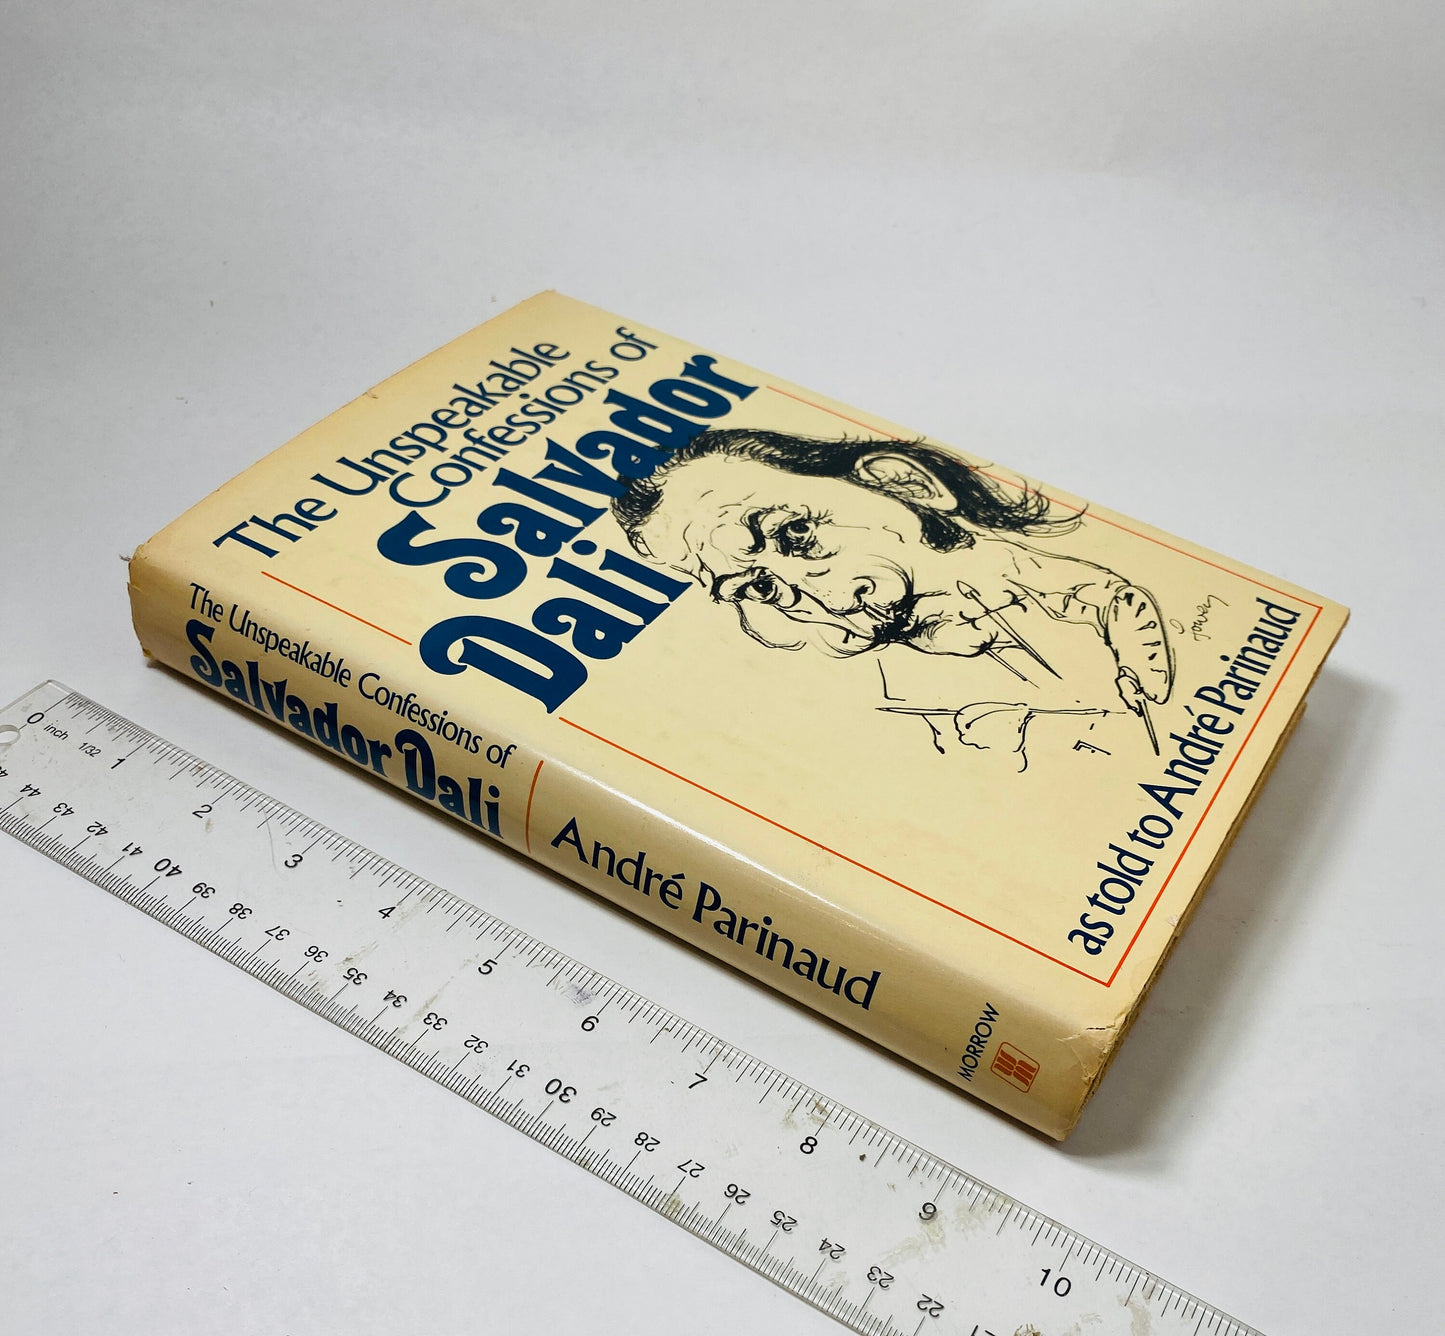 Unspeakable Confessions of Salvador Dali by Andre Parinaud vintage art book FIRST EDITION circa 1976 first-hand knowledge